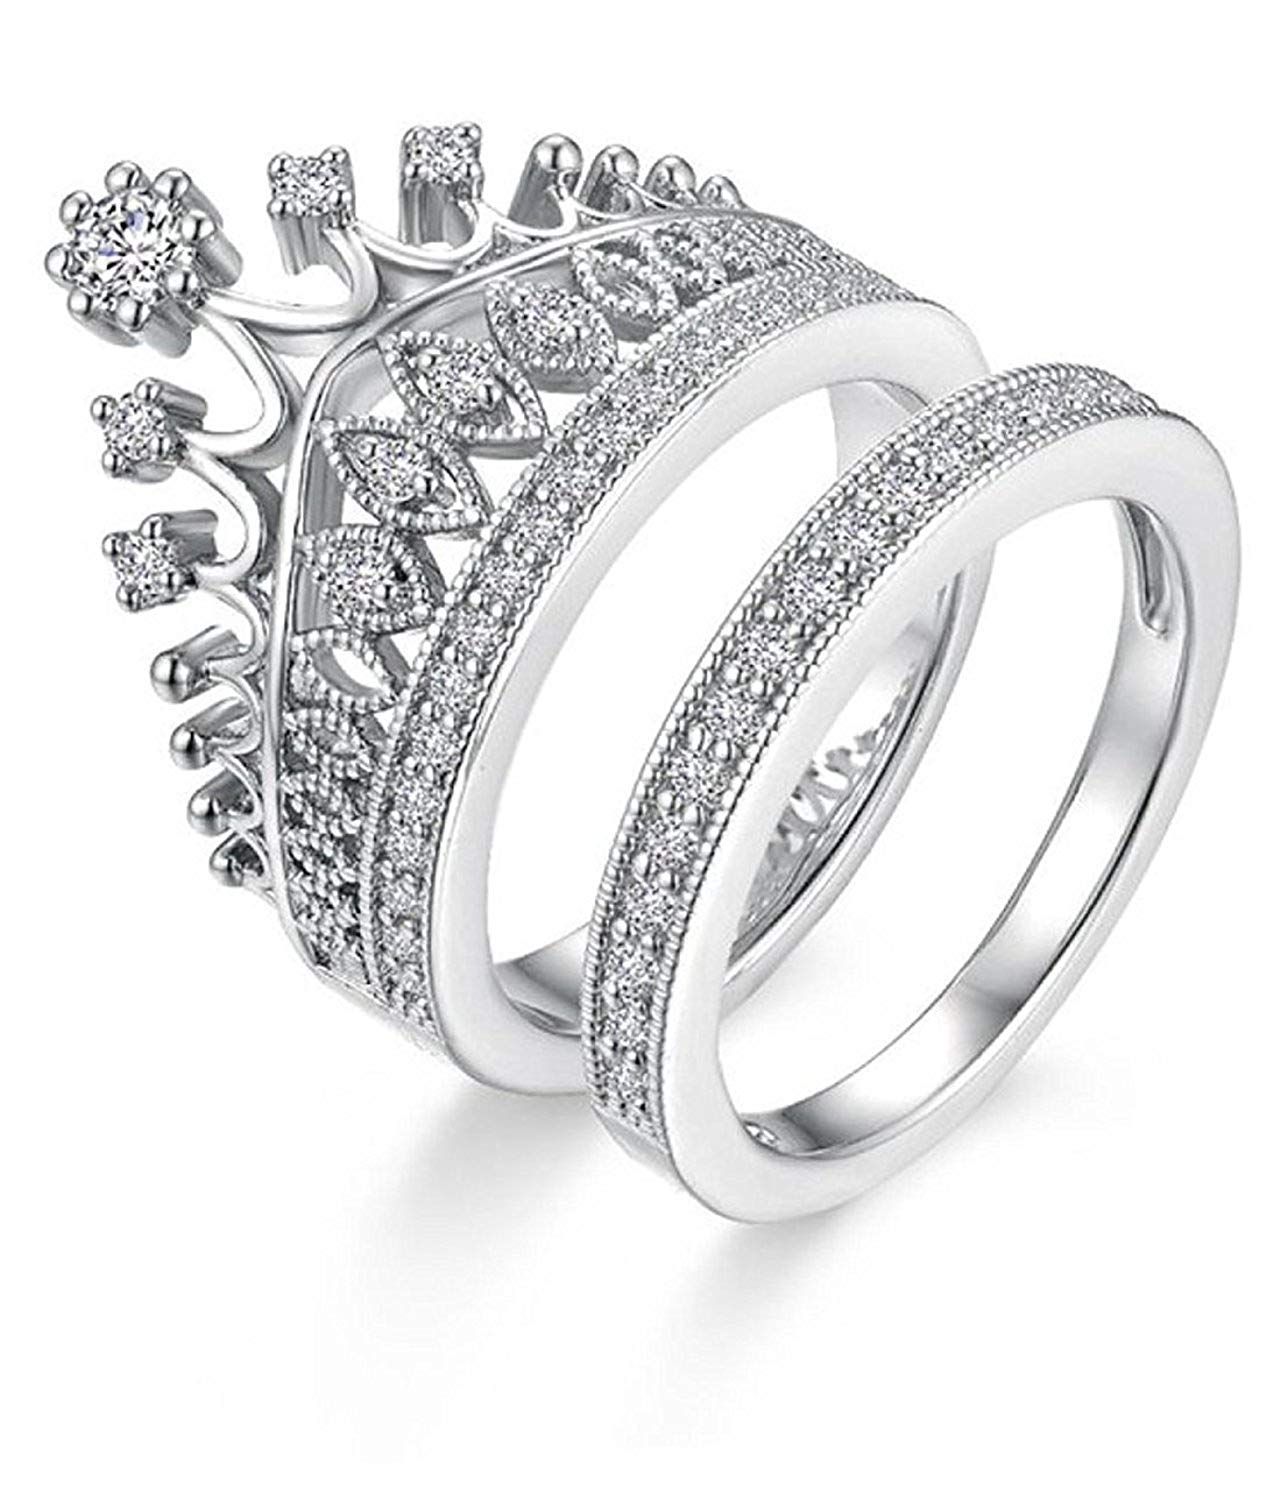 Luxurious Platinum King and Queen Rings